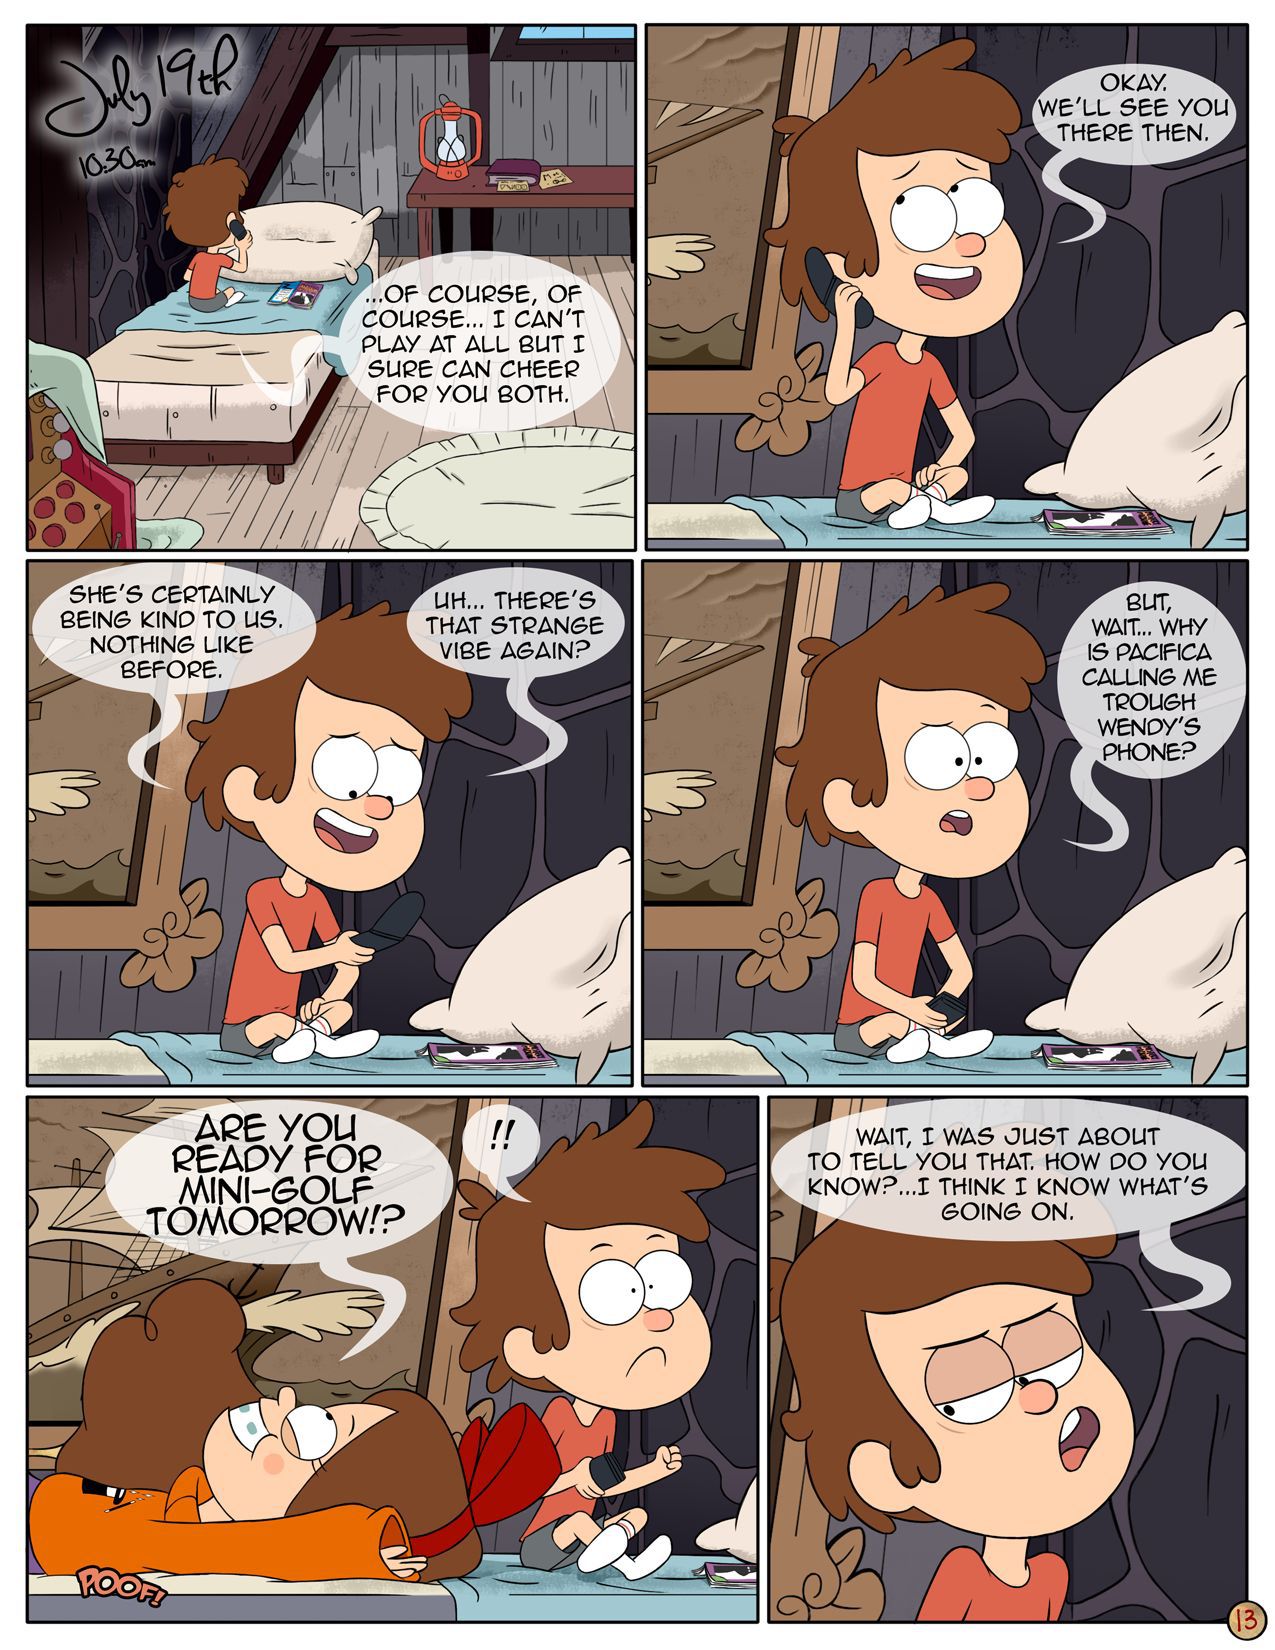 [Area] Next Summer (Gravity Falls) [Ongoing] 14